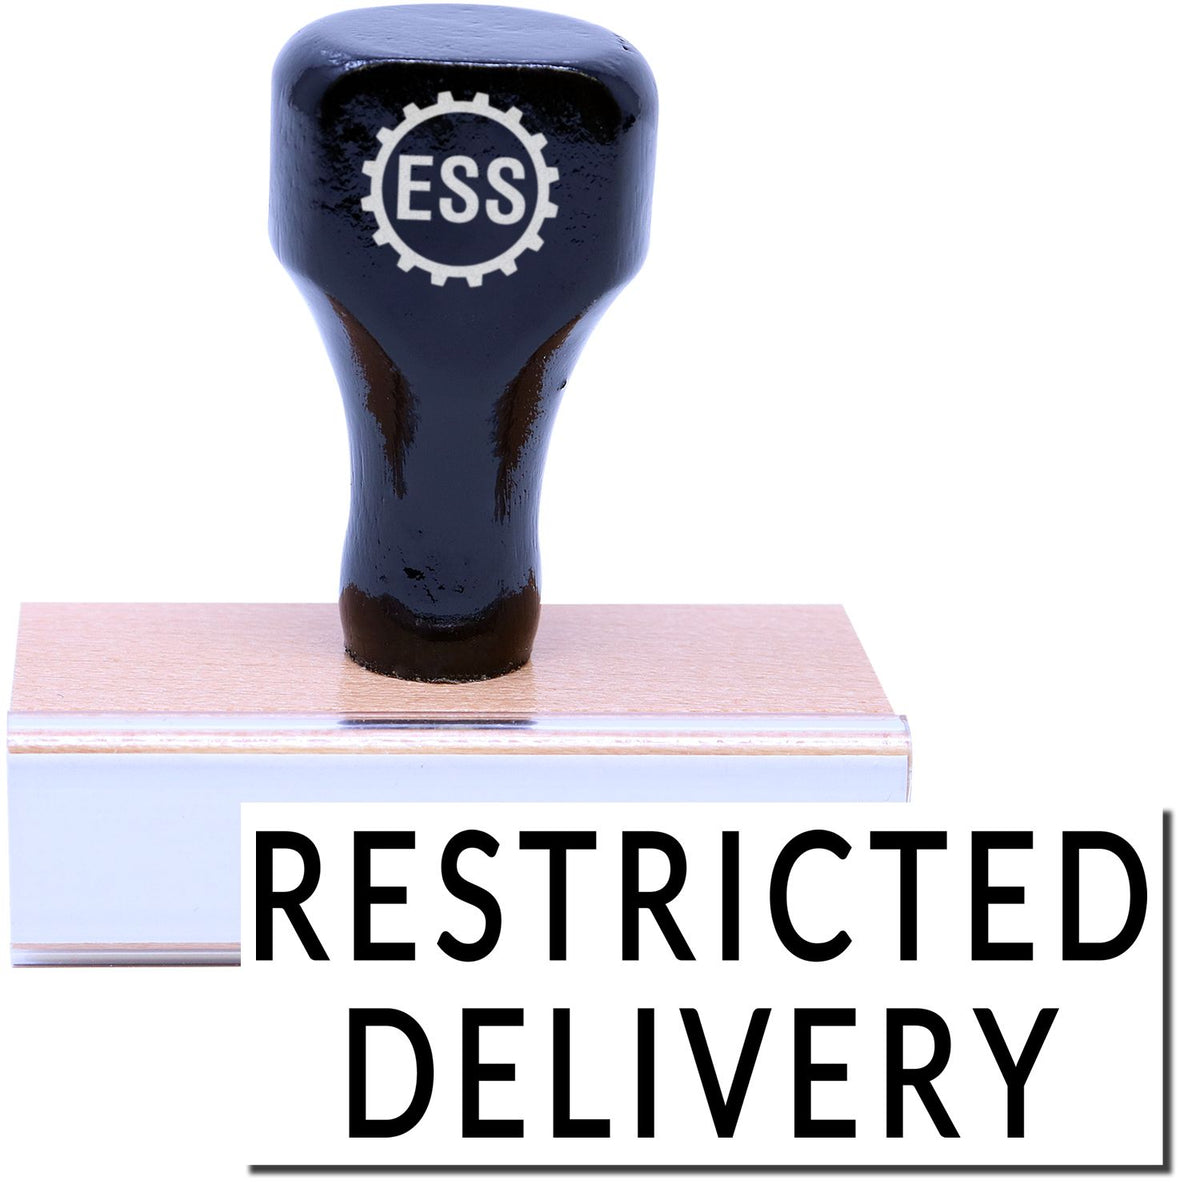 A stock office rubber stamp with a stamped image showing how the text &quot;RESTRICTED DELIVERY&quot; in a large font is displayed after stamping.